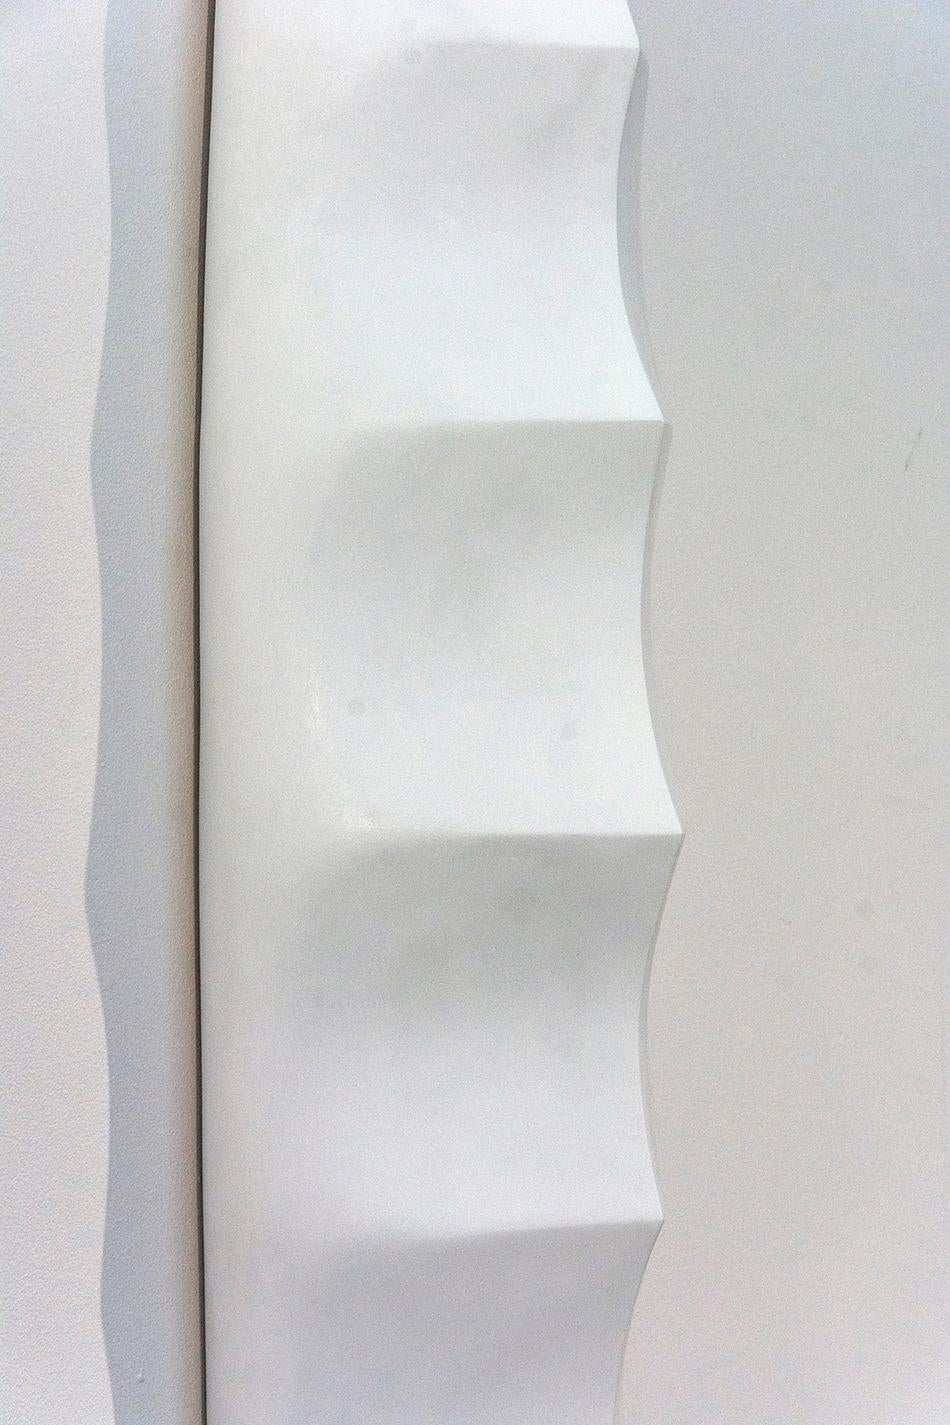 Biomorphic No 3 - bright, white, minimal, abstract, plaster and wax wall relief For Sale 2